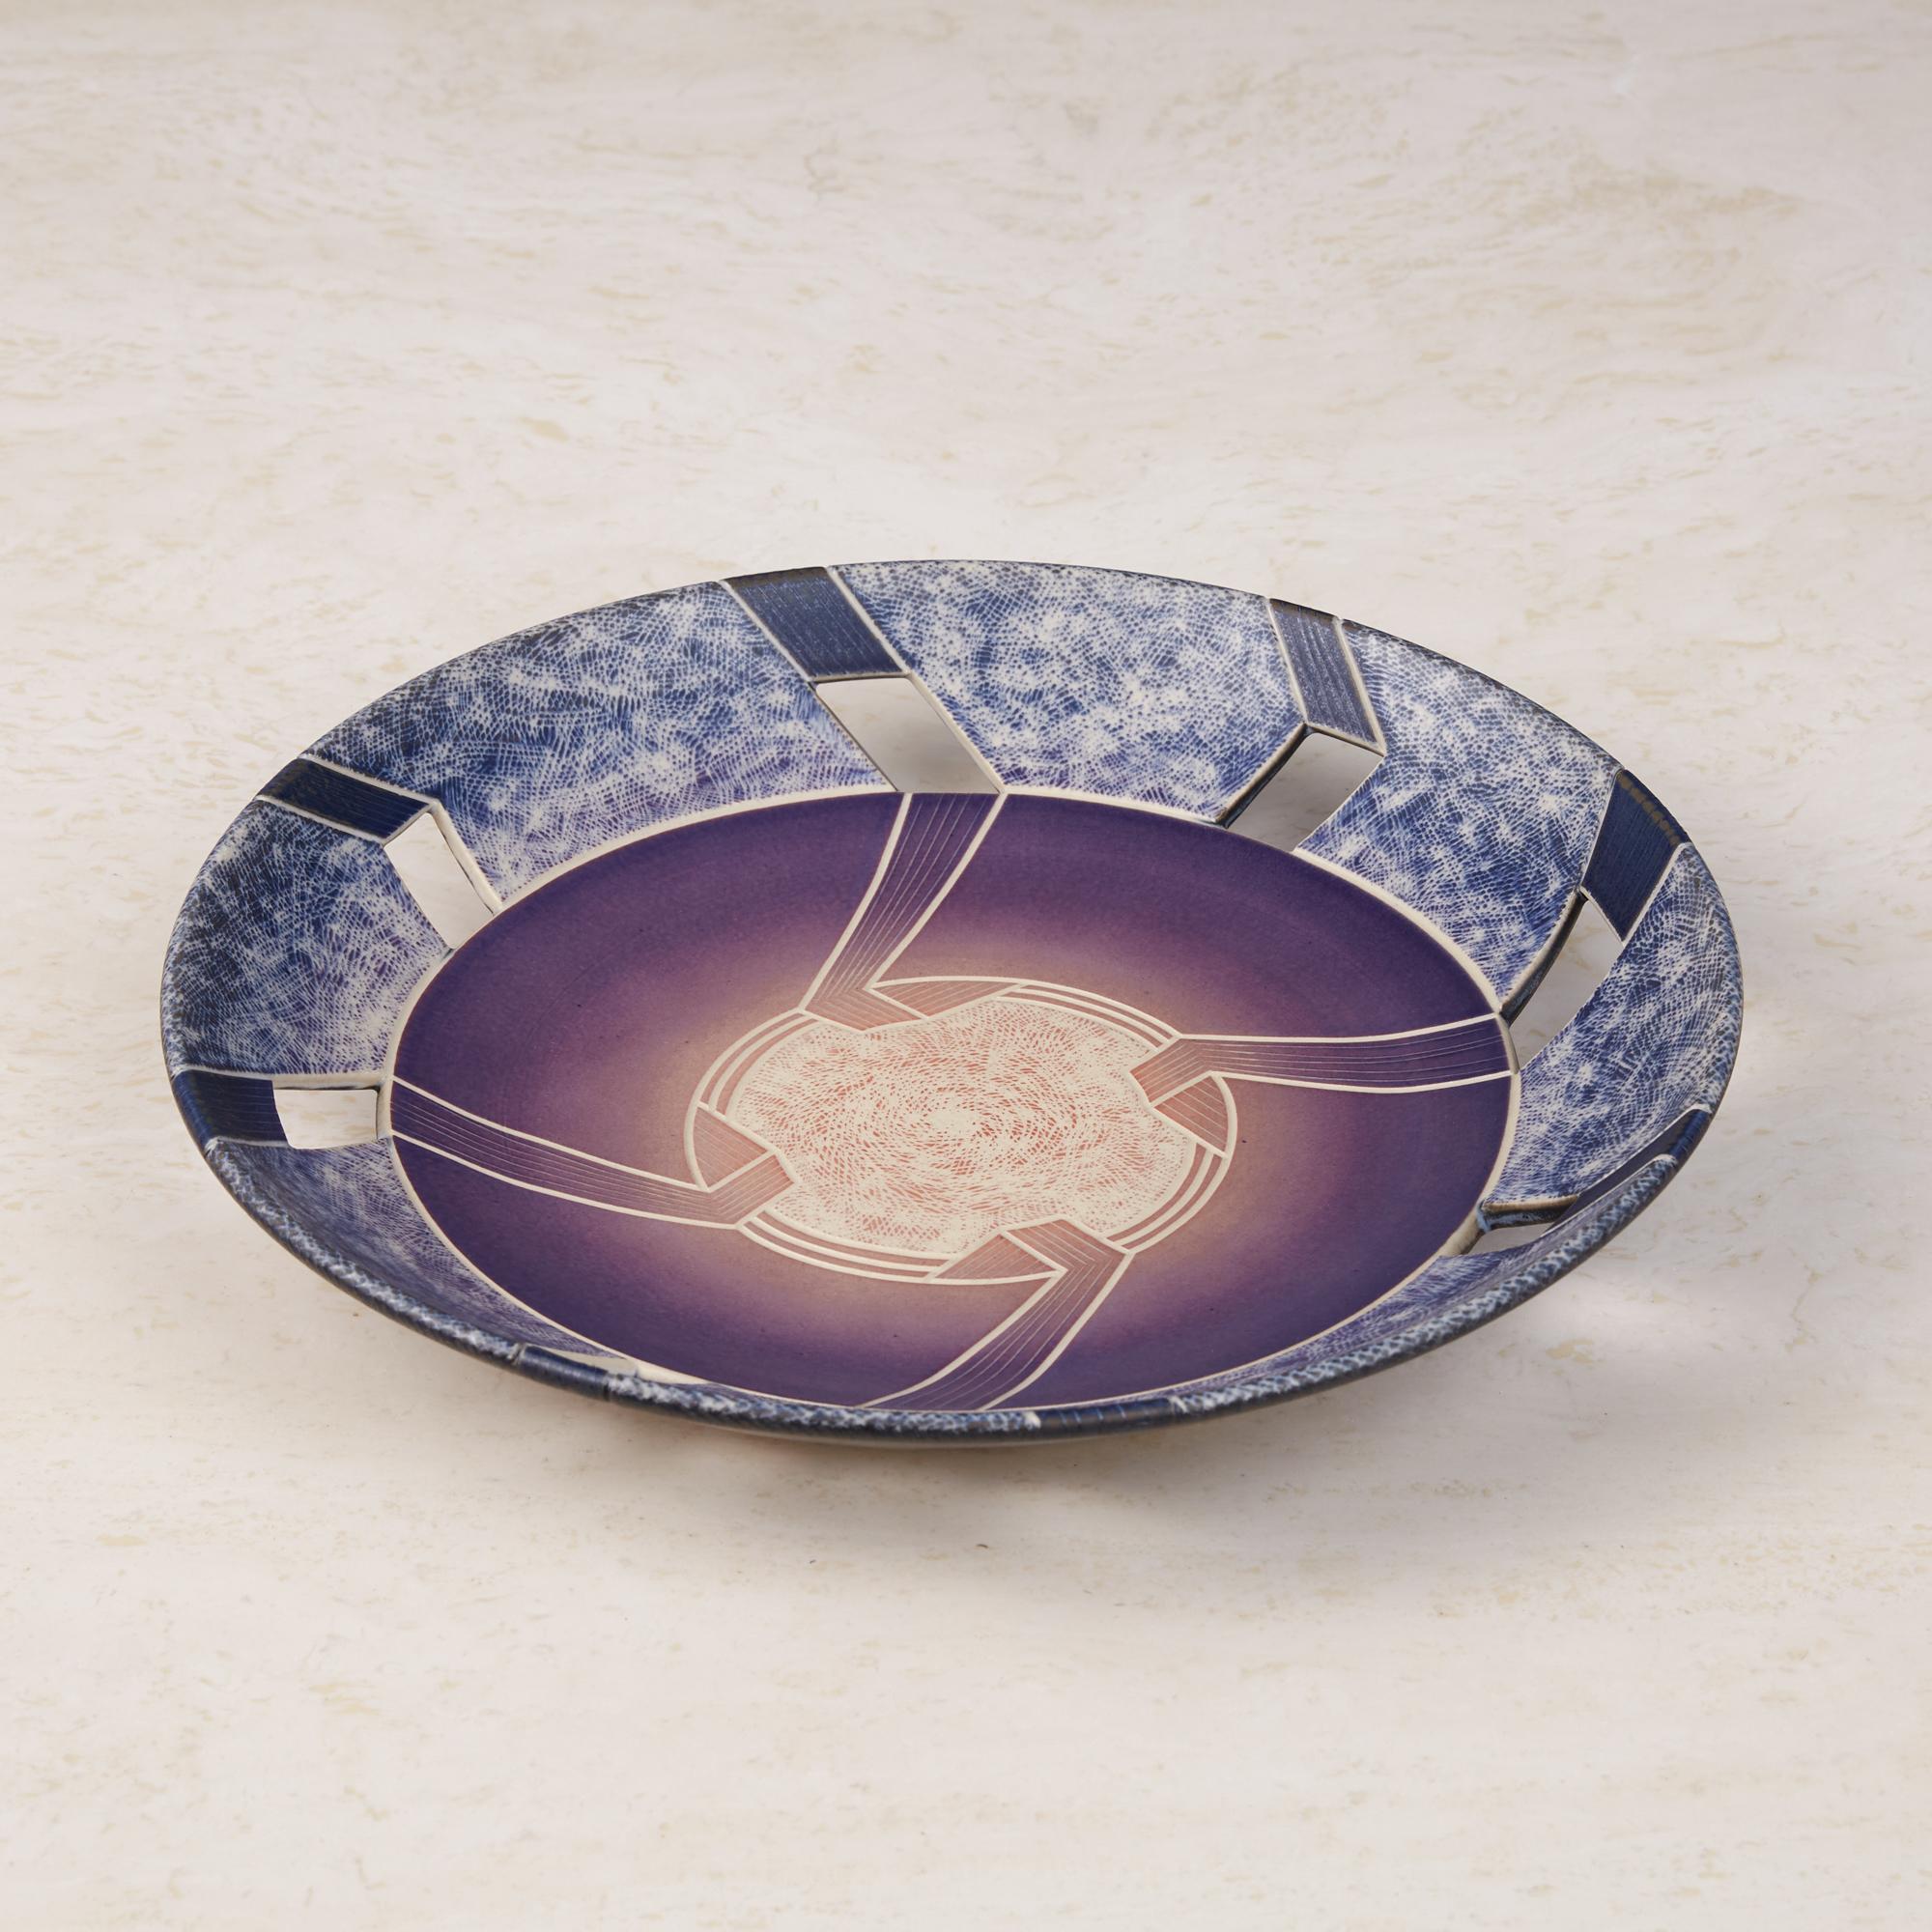 The practice of sgraffito is on full display on this plate made by ceramic artist Wayne L Bates. After spending decades teaching at various arts institutions, Bates became inspired by Native American artistry and studied their ceramics techniques.